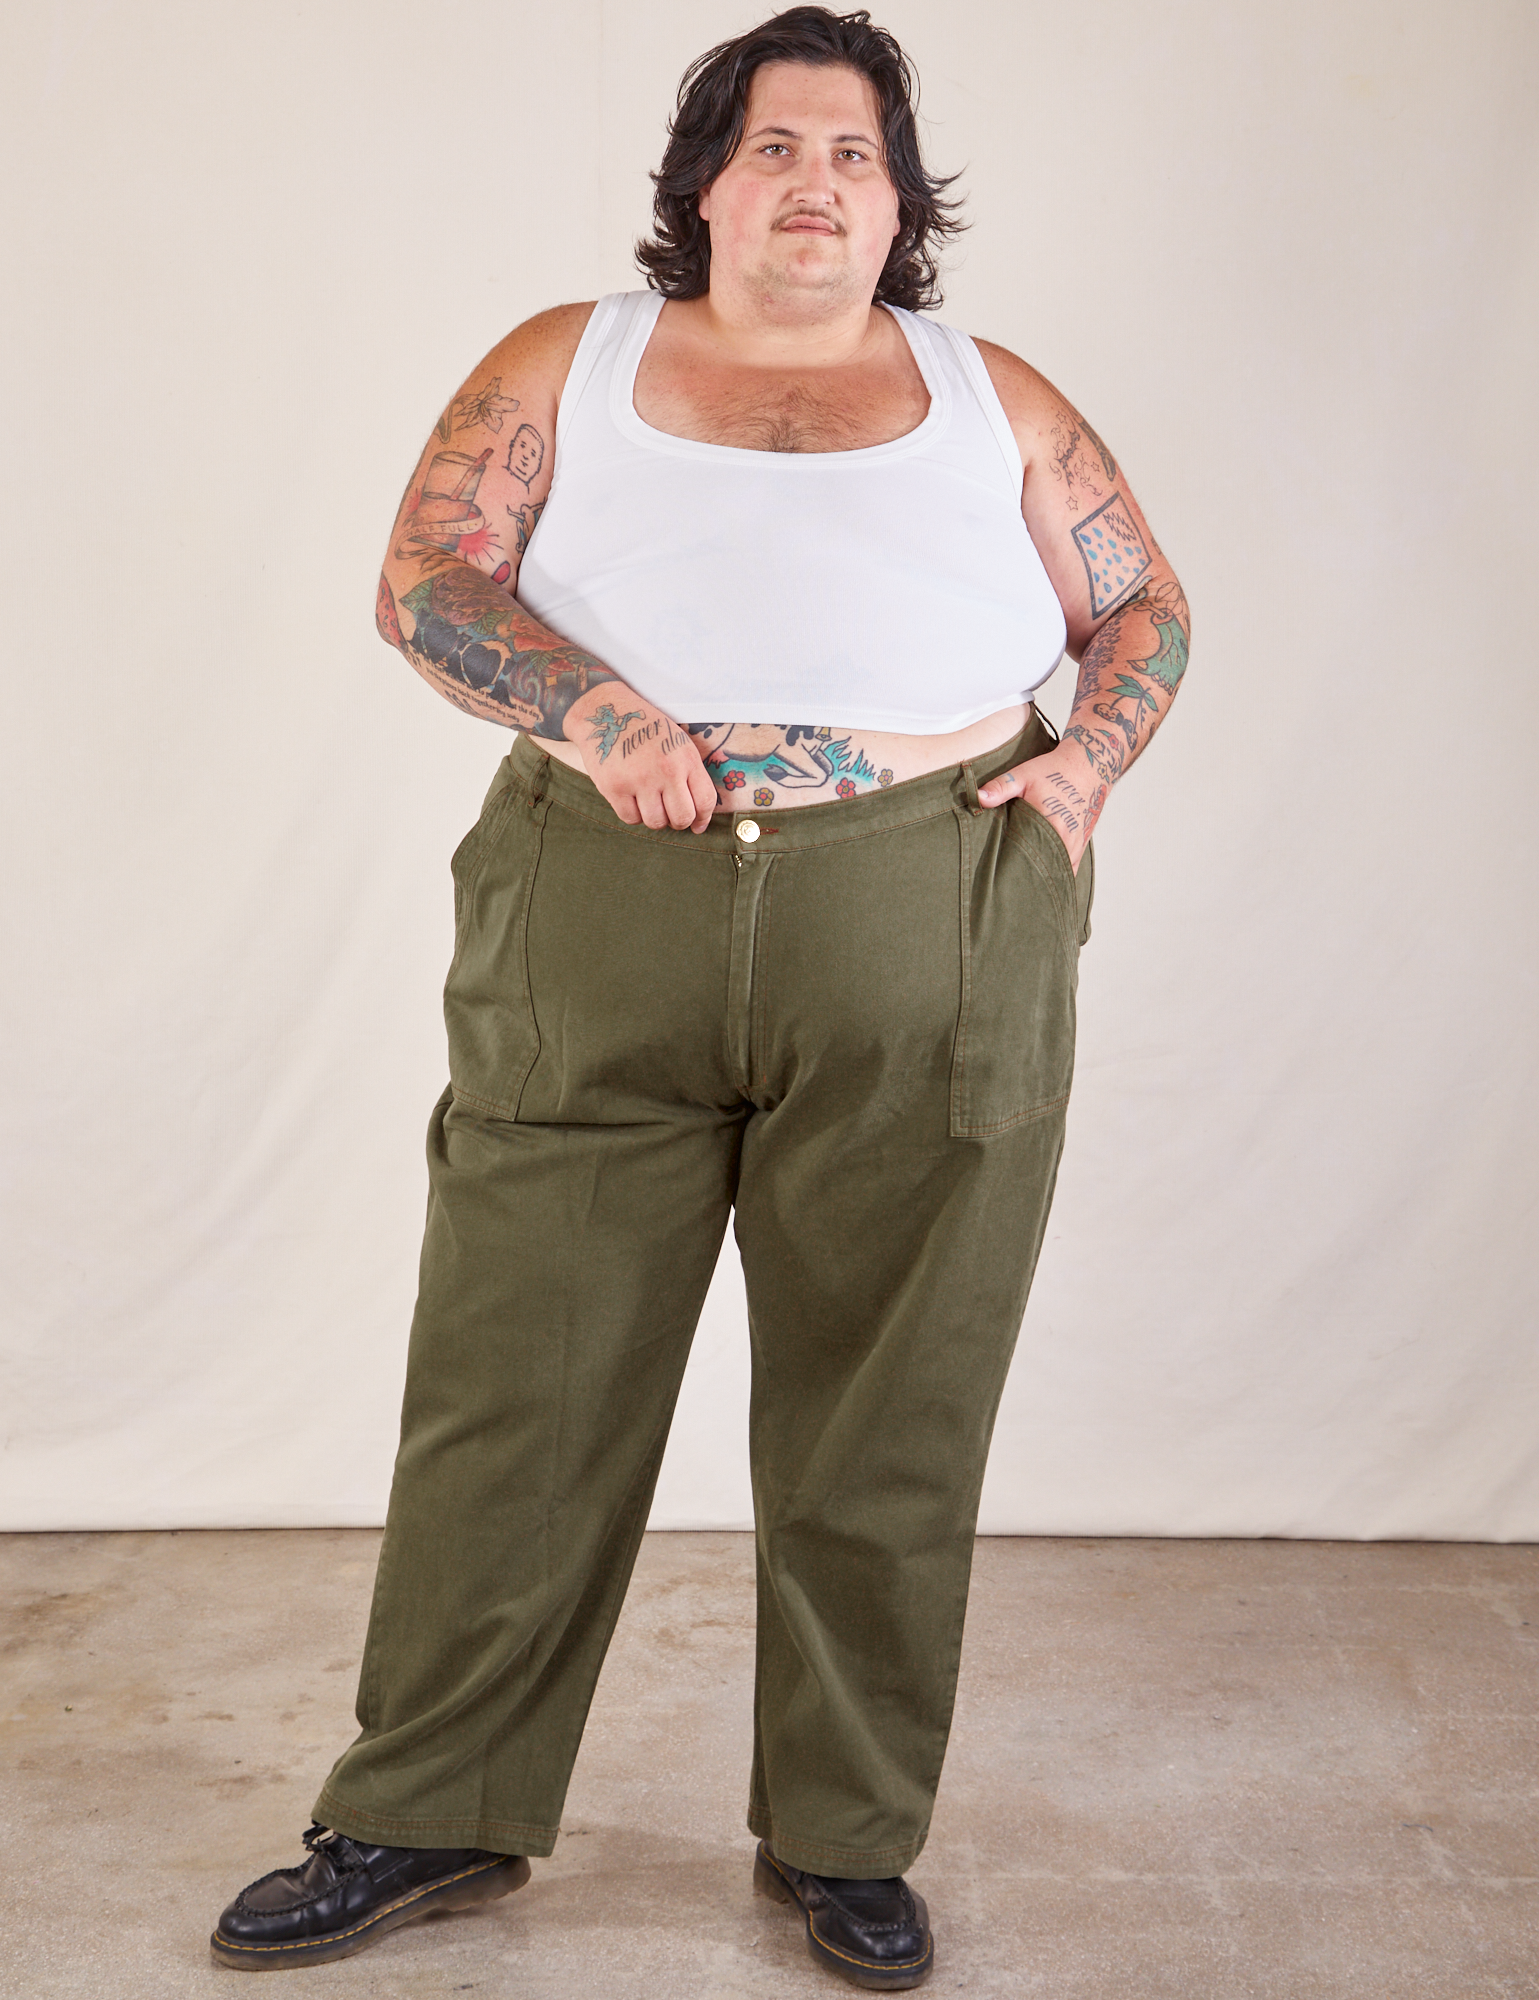 Sam is 5'10 and wearing 4XL Work Pants in Surplus Green paired with a Cropped Tank in vintage tee off-white